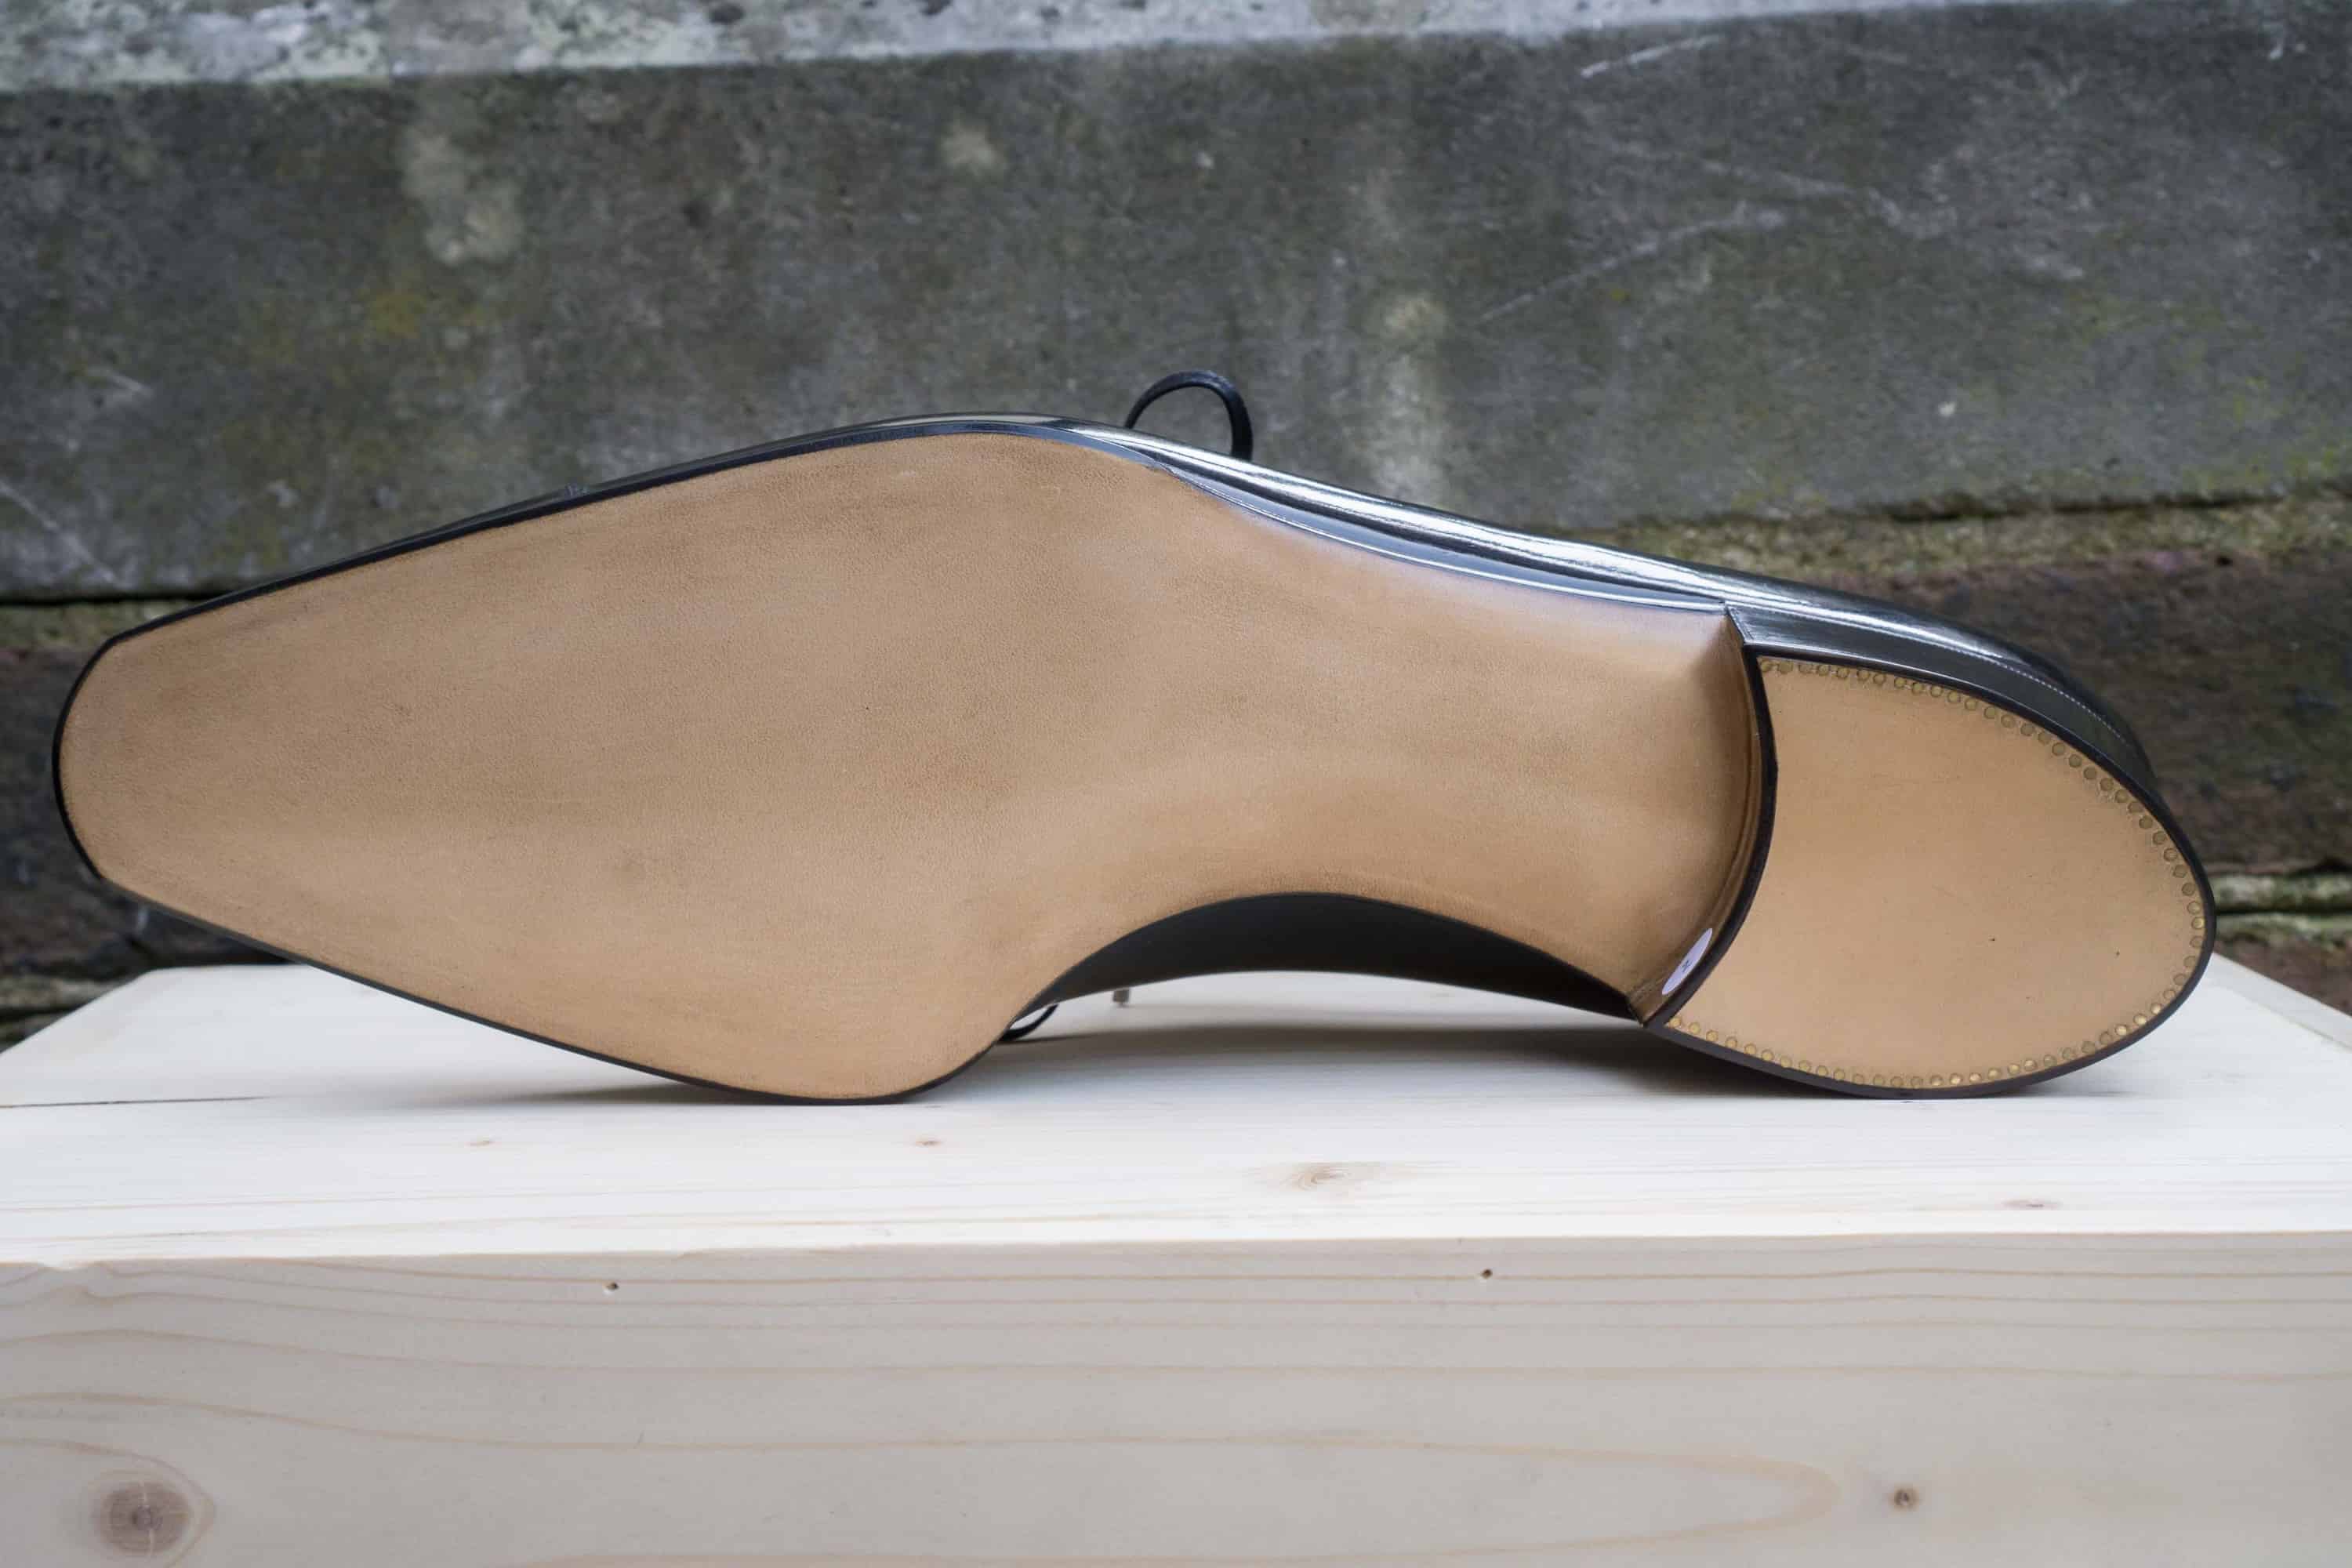 World Championships in Shoemaking -- The Competition's Shoe Entries Part 1.